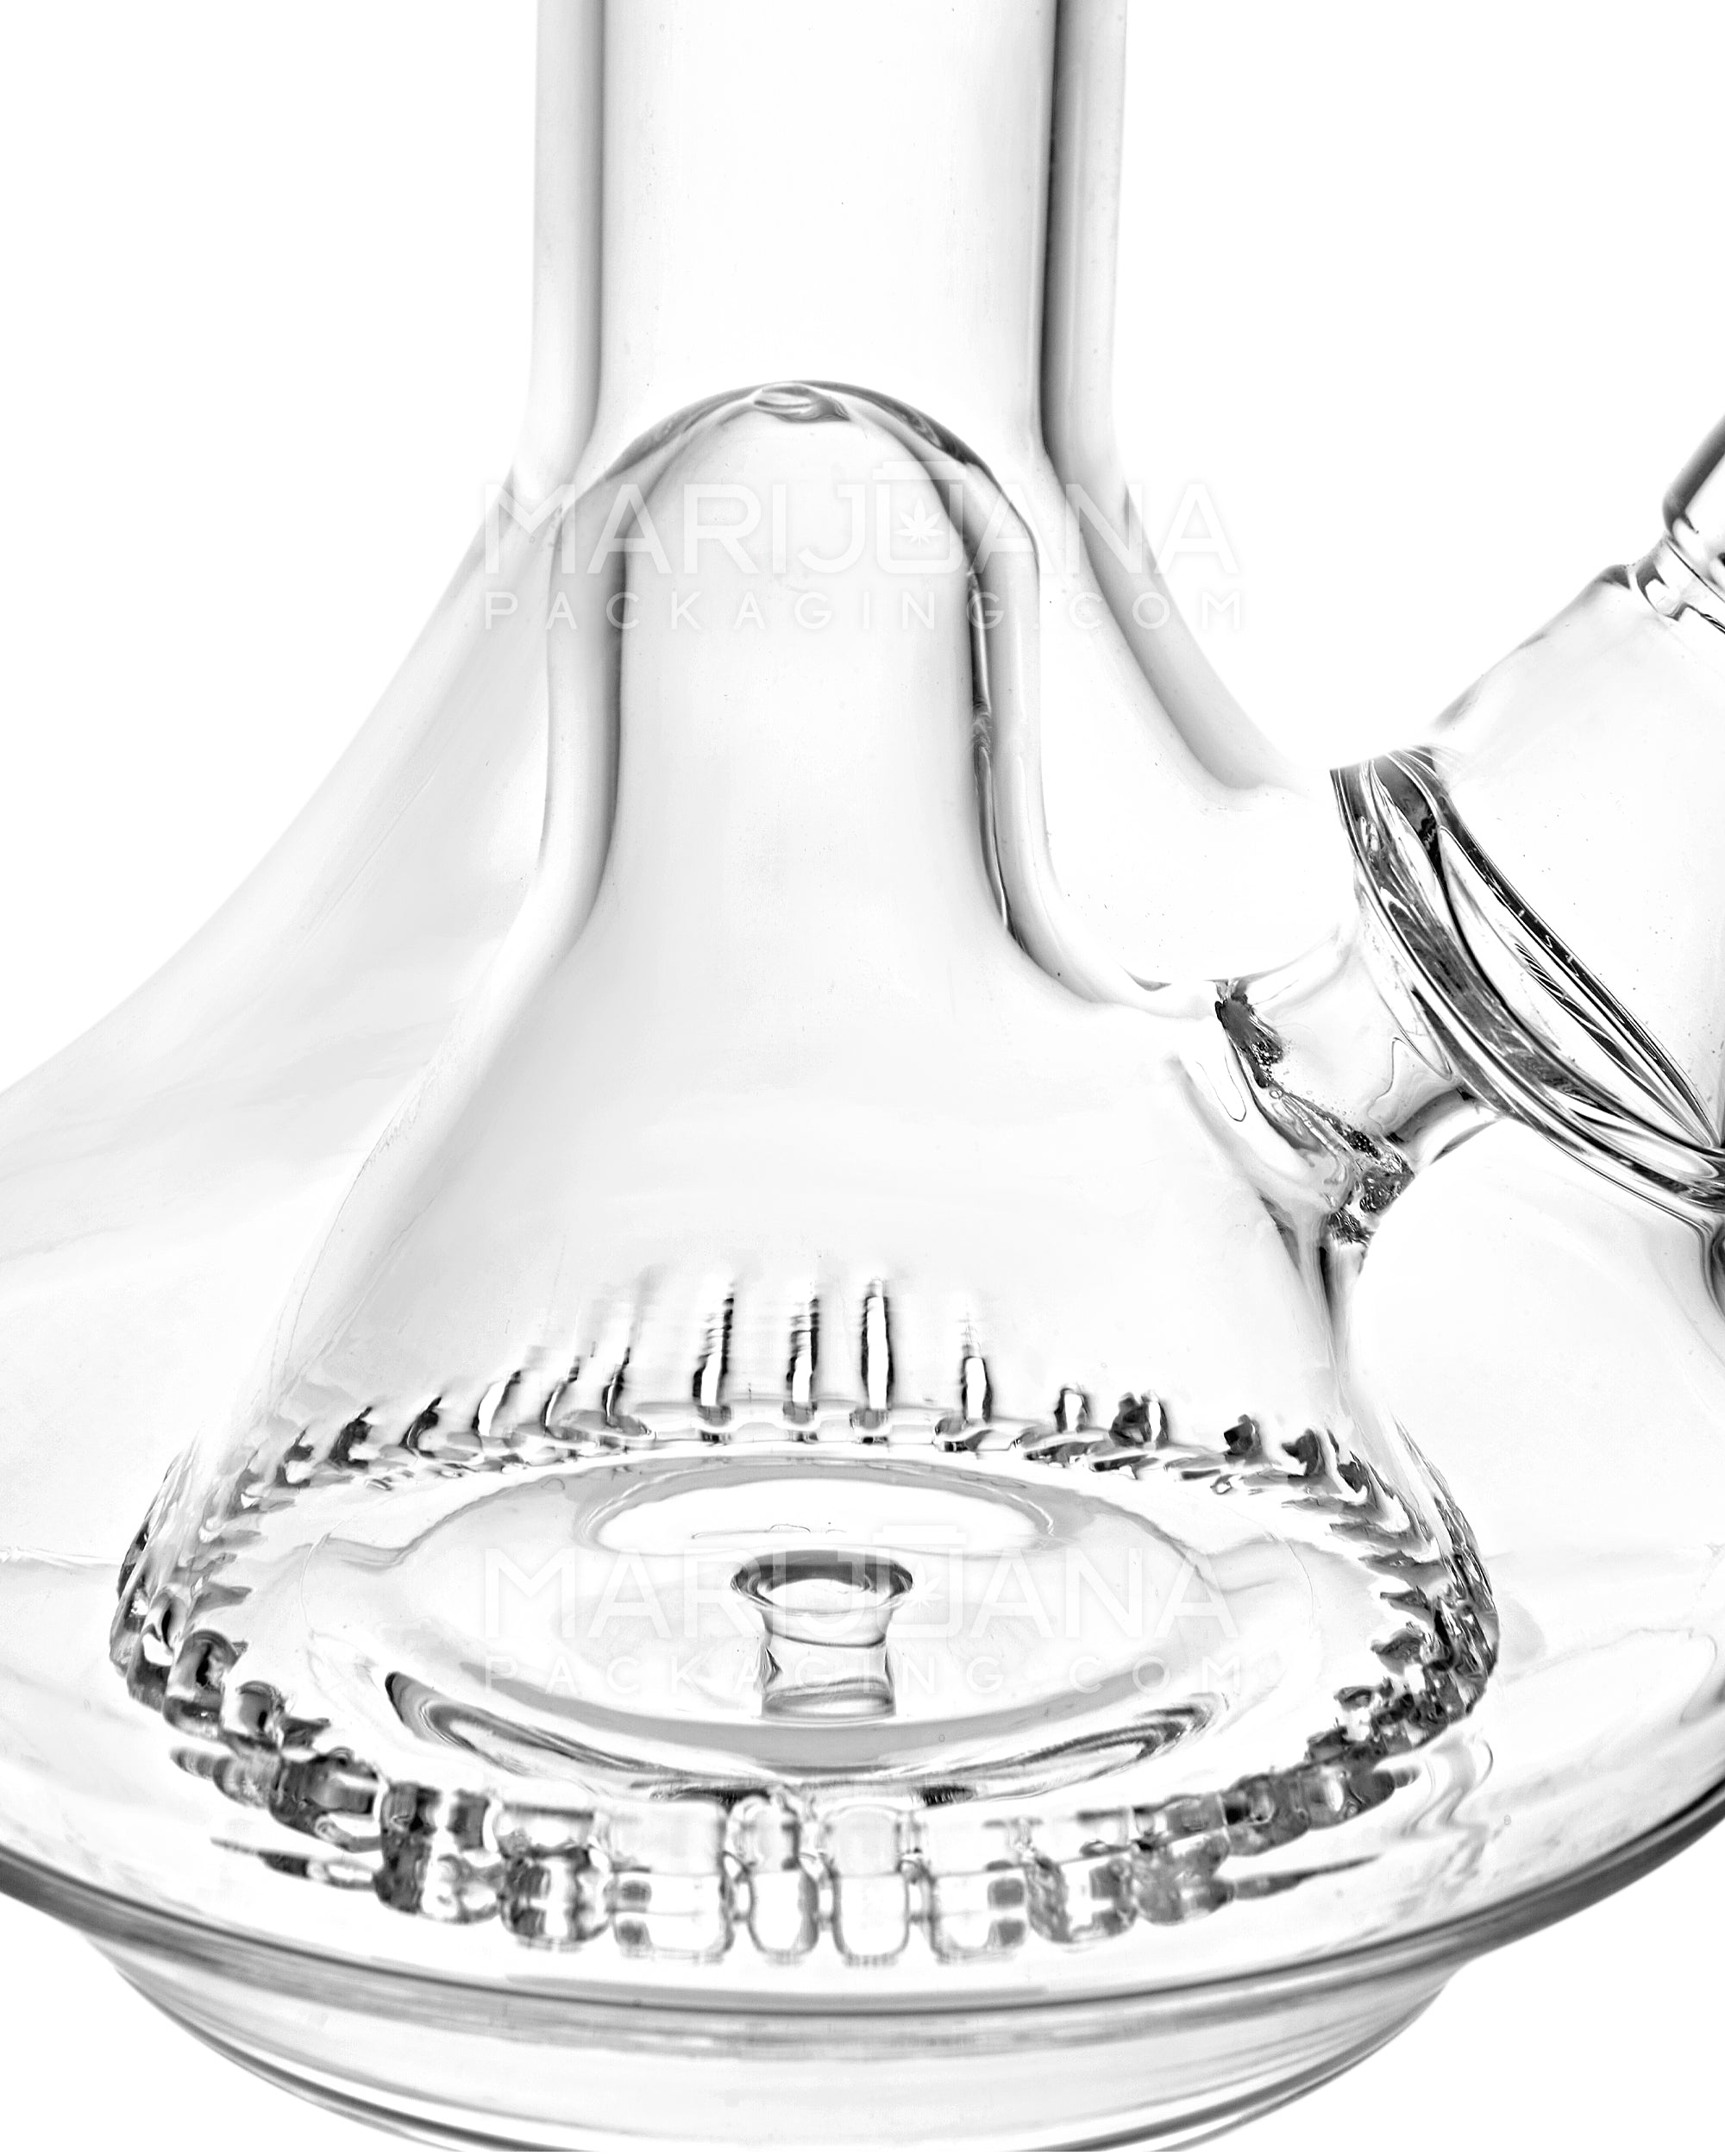 Straight Neck Showerhead Perc Thick Glass UFO Water Pipe w/ Wide Base | 8in Tall - 14mm Bowl - Clear - 3